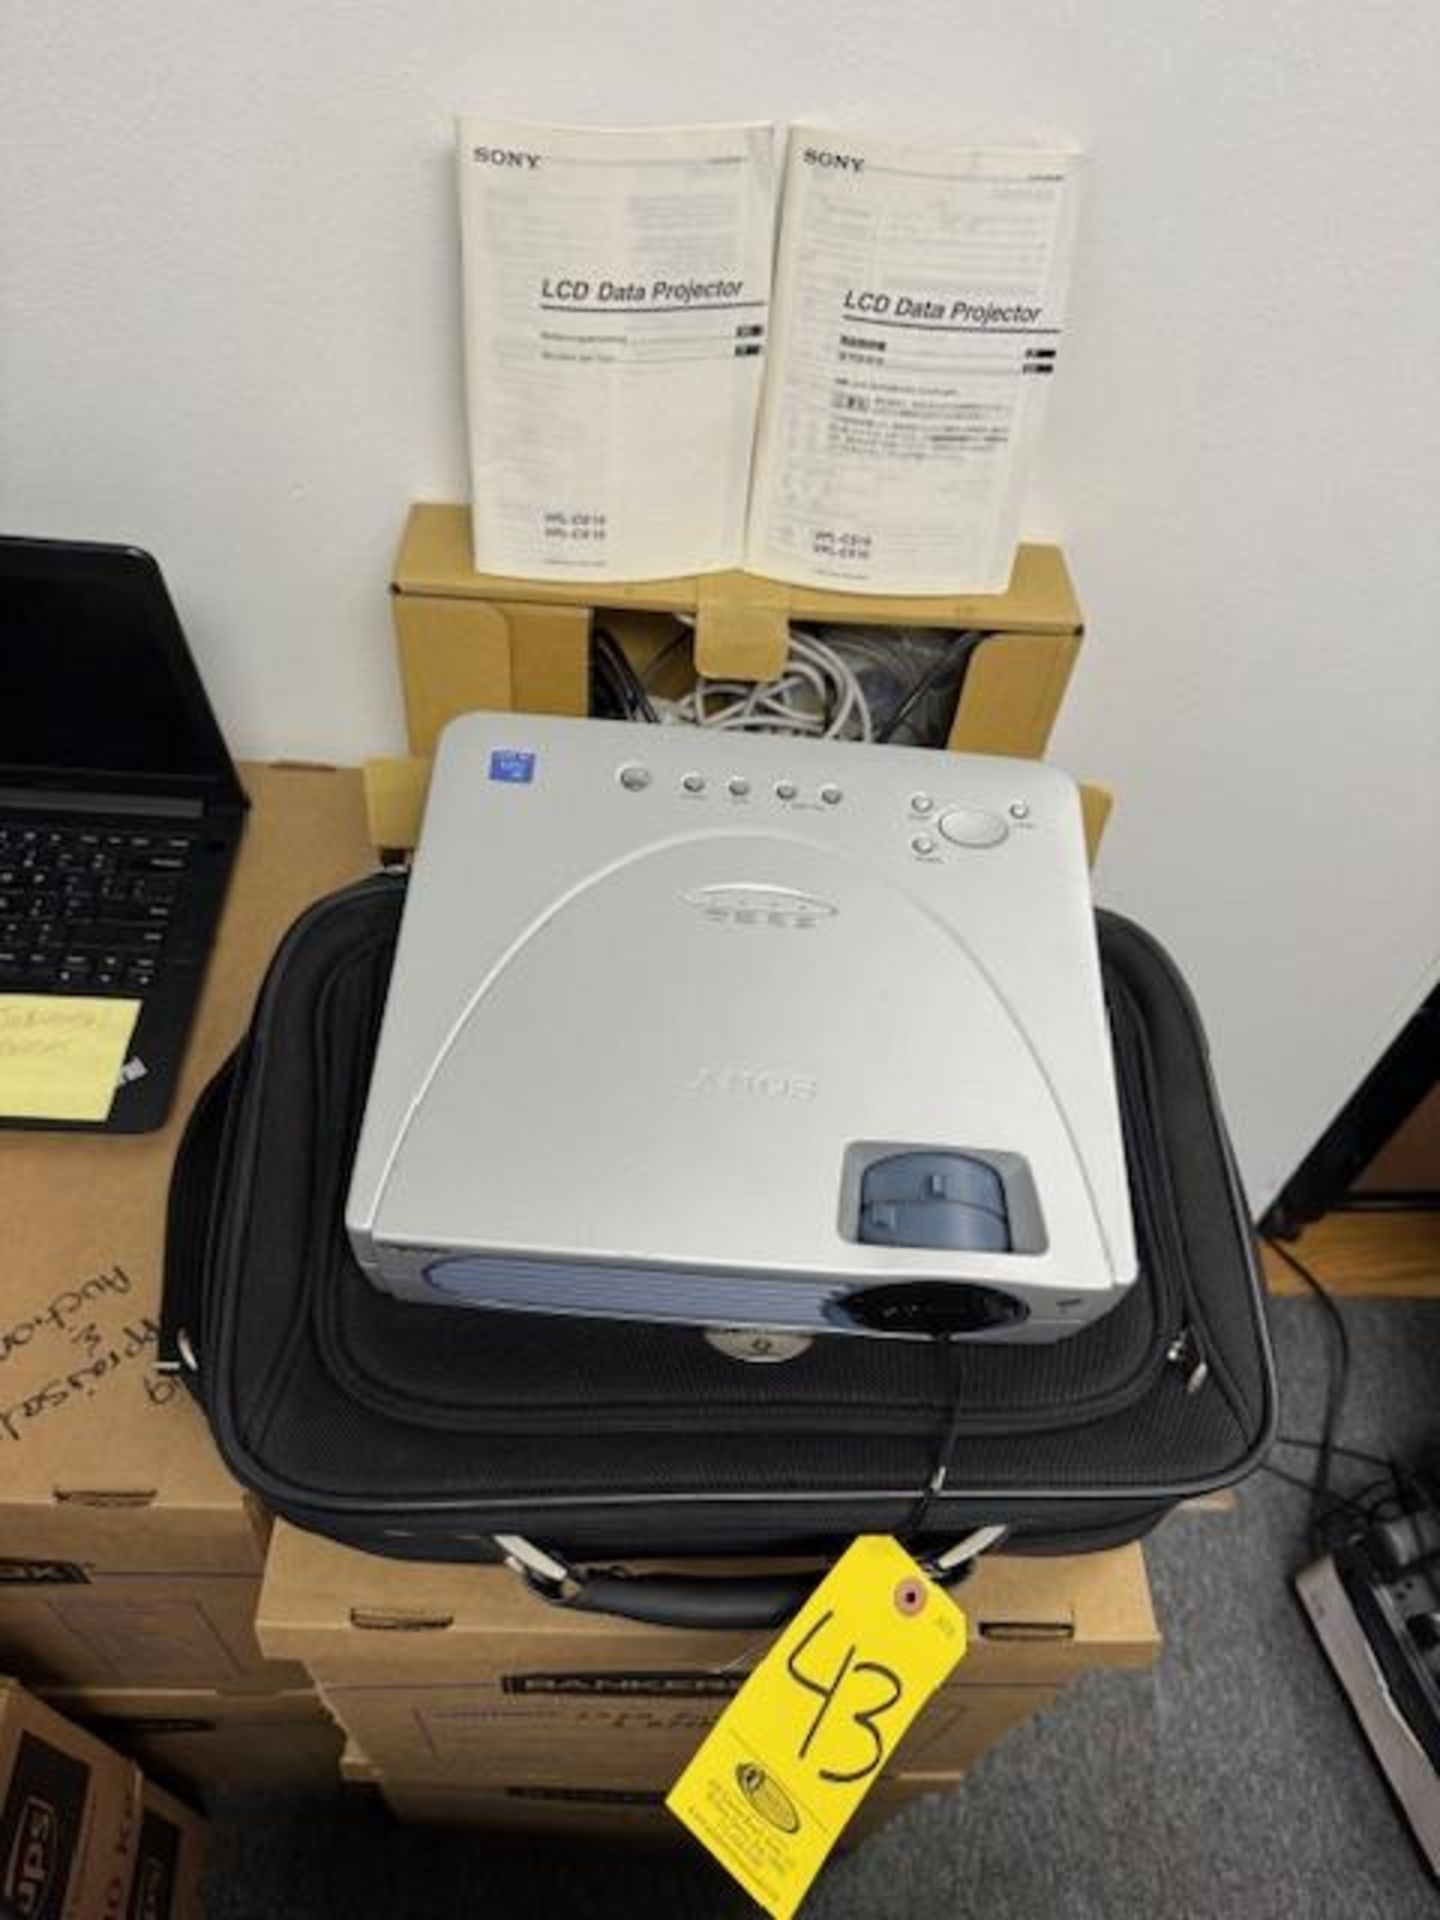 SONY LCD DATA PROJECTOR VPL-CS10 WITH CASE (Located in Willow Grove, PA) - Image 2 of 2